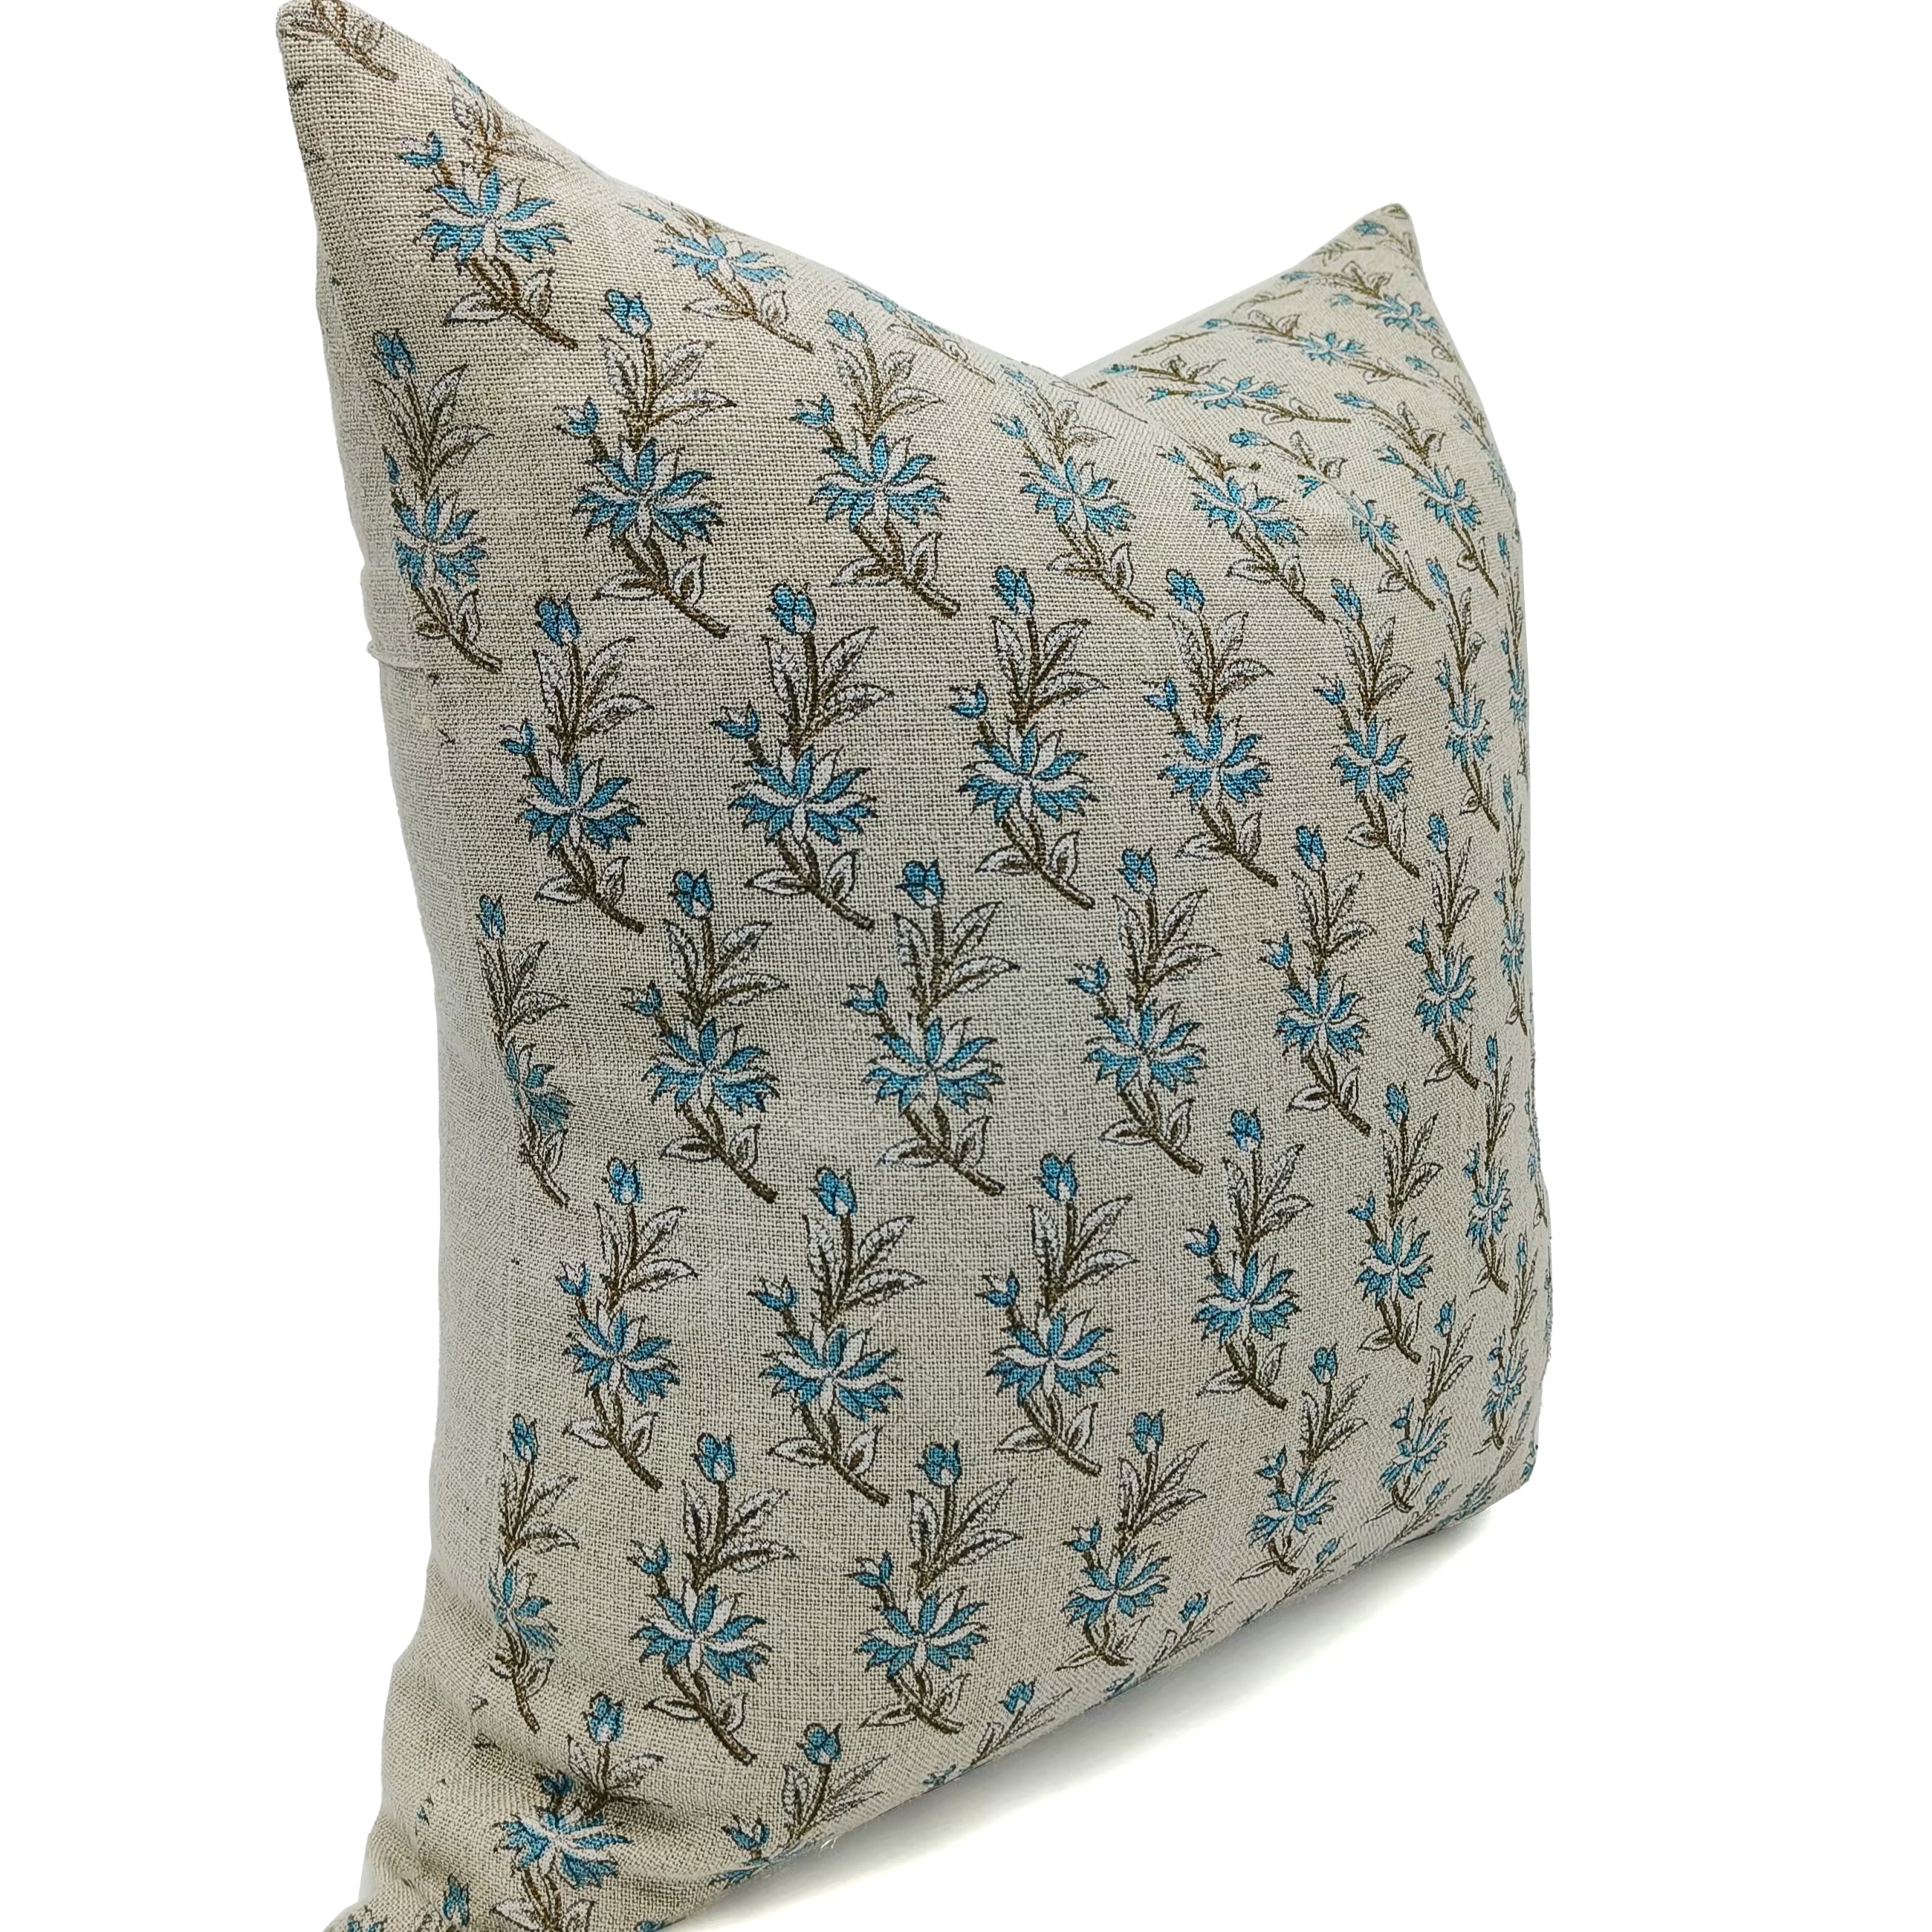 Block print Linen Pillow cover, Handblock cushion cover, decorative pillow cover, throw pillow, set two covers, outdoor sofa cushion, case king decorative covers, boho large small, bed farmhouse square, vintage neutral accent, floral bedroom décor lumbar, block print living room cushions, handmade hand block pillow, bohemian